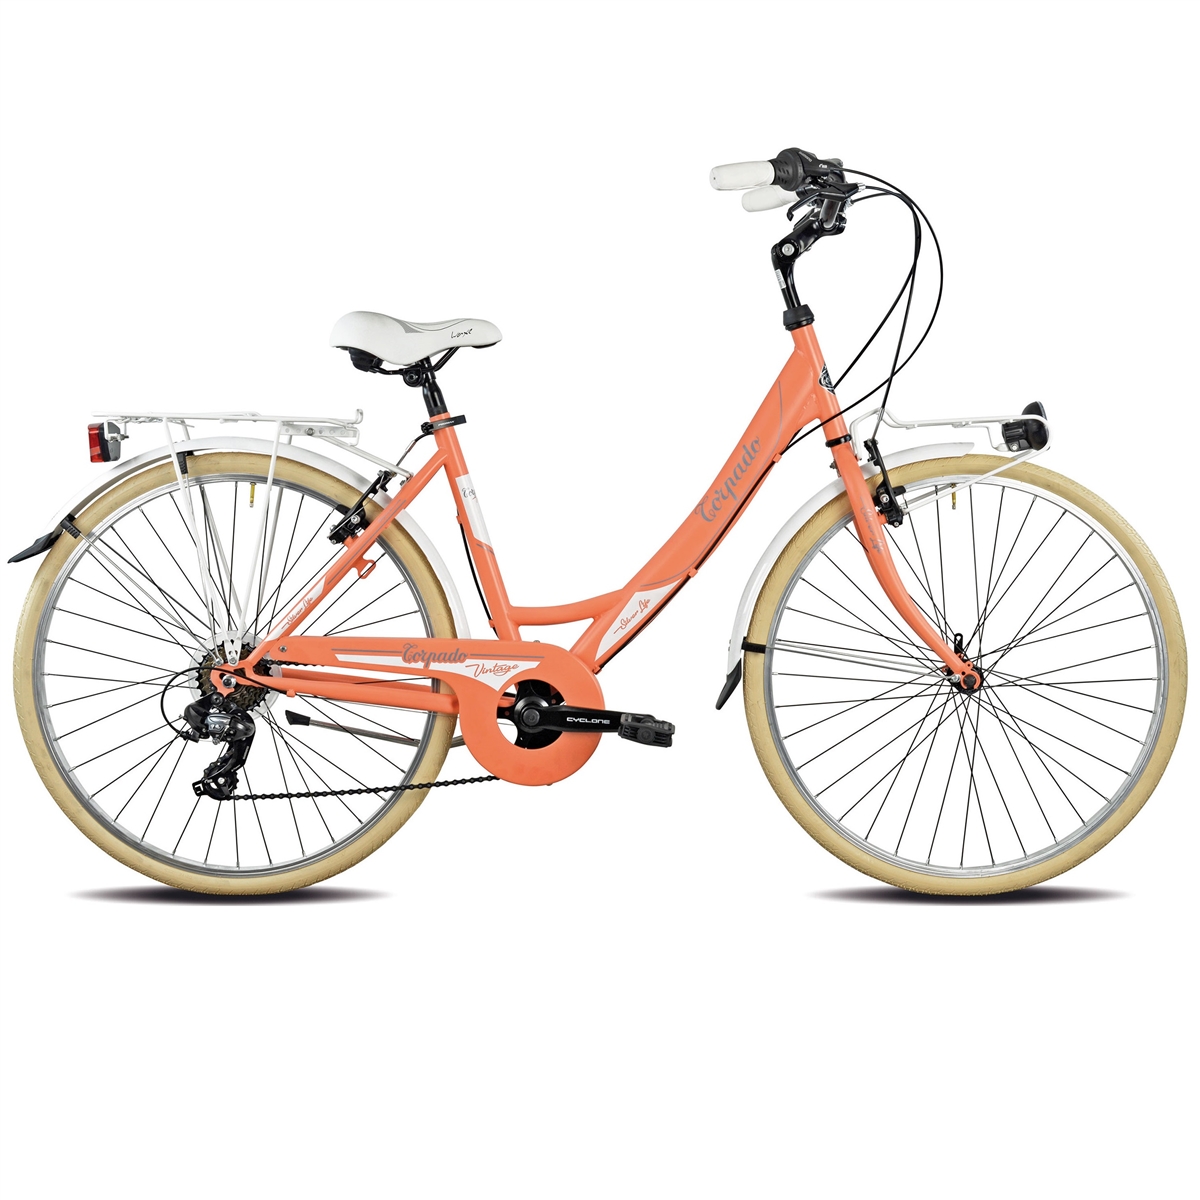 bicycle city T120 silverlife 26'' lady steel 6 speed Peach